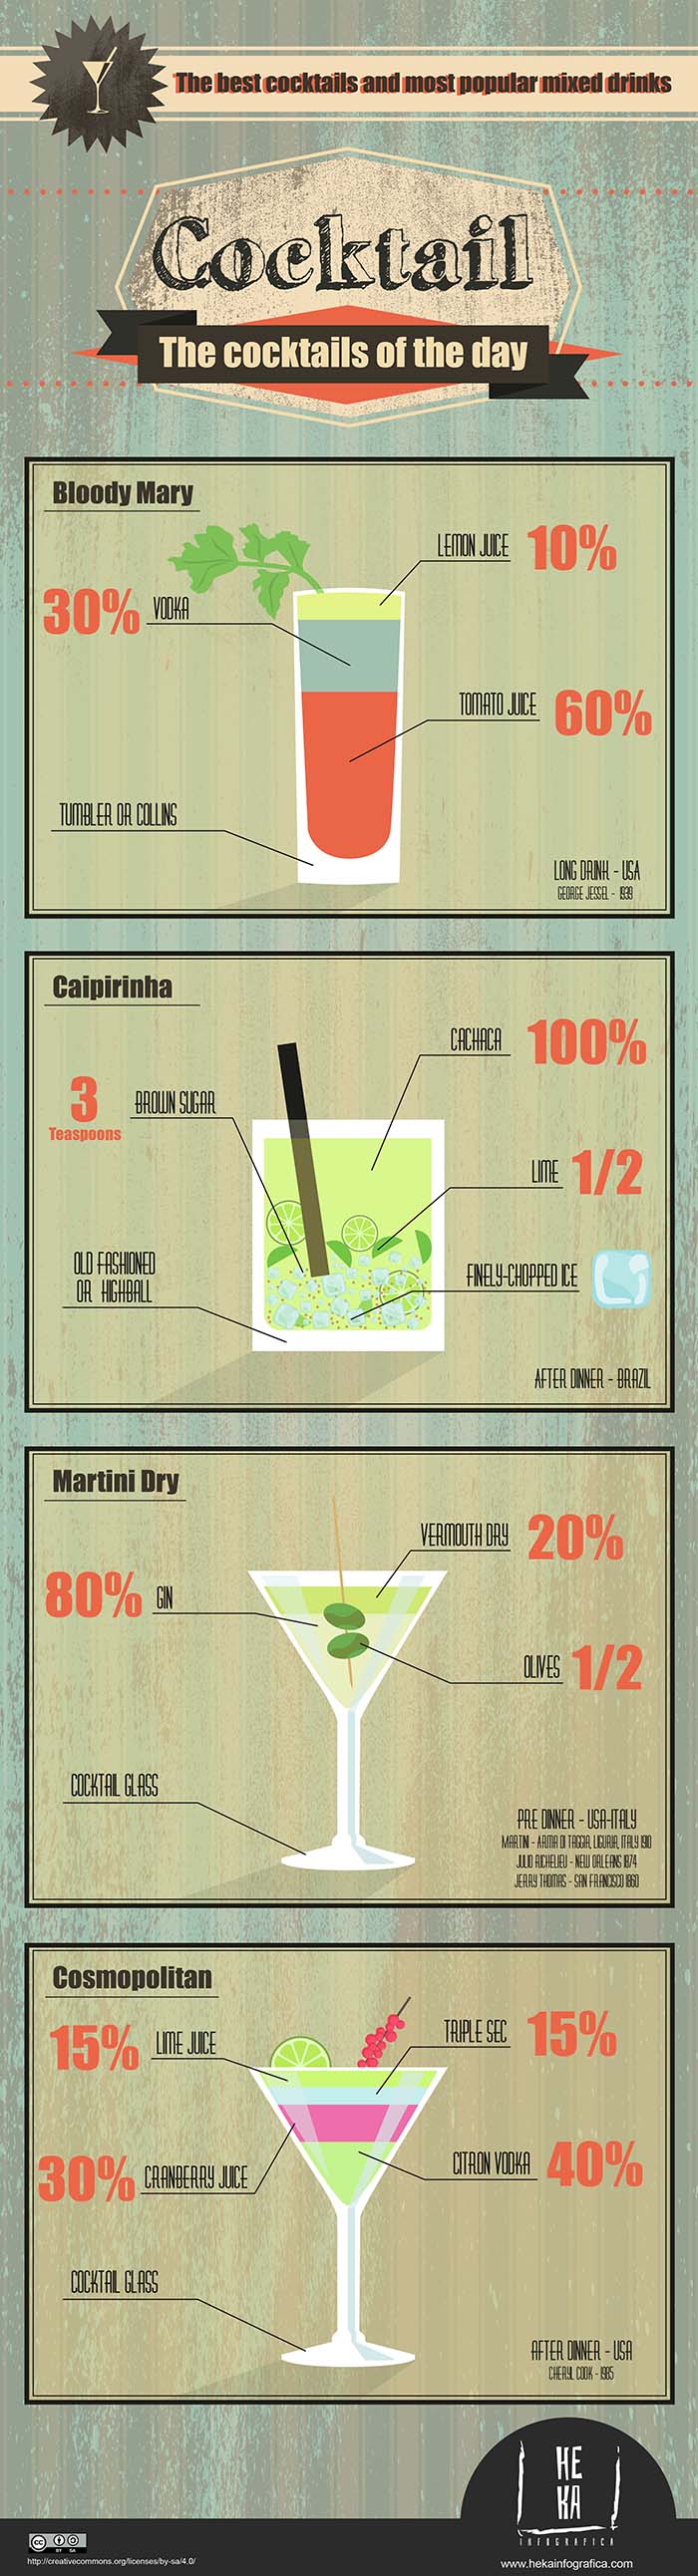 Infographics Cocktail - the Cocktails of the day. The best cocktails and most popular mixed drinks. Bloody Mary, Caipirinha, Martini Dry, Cosmopolitan